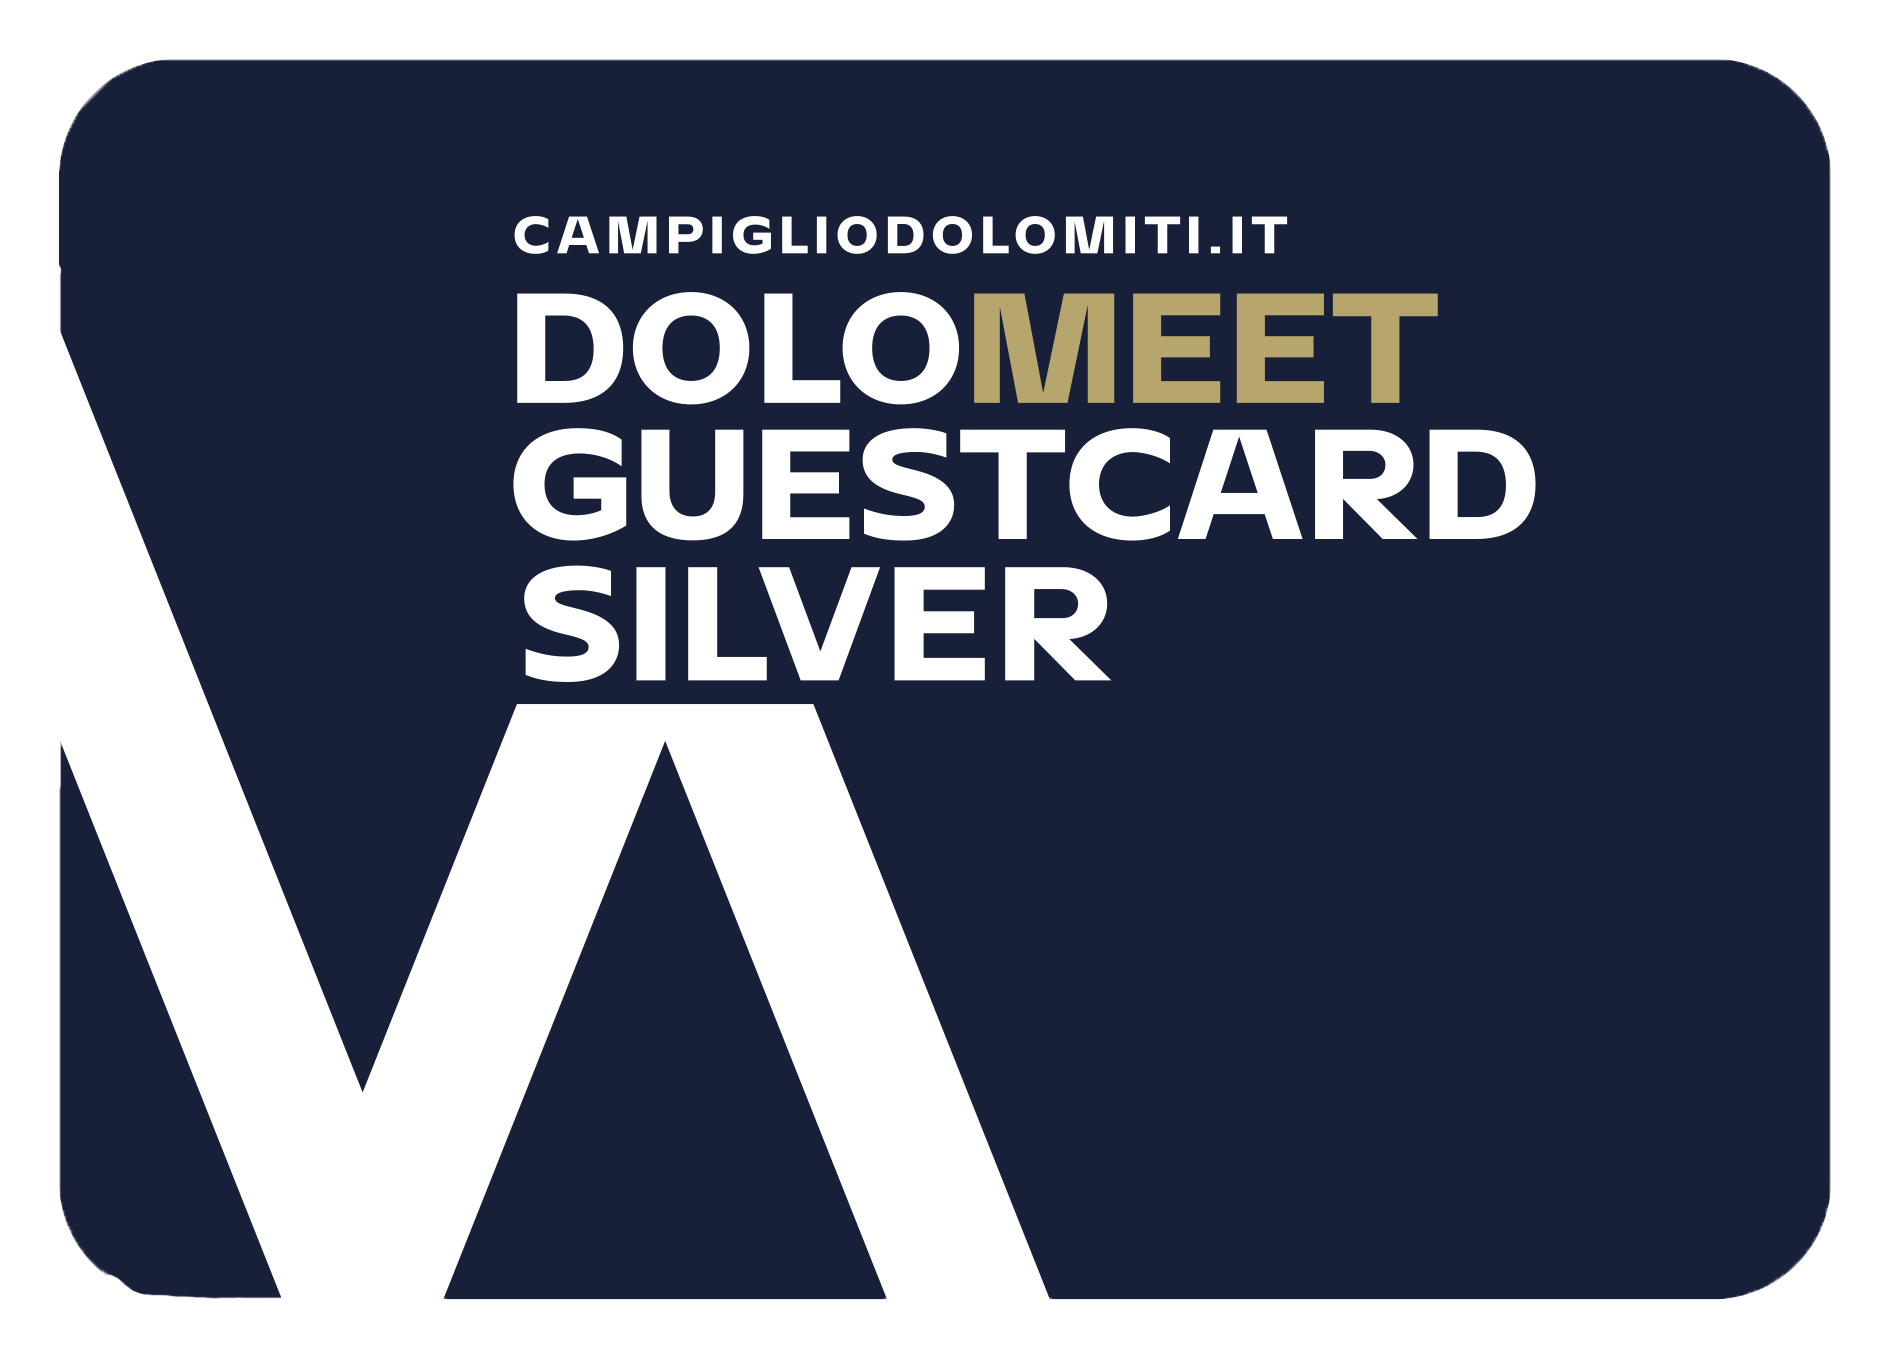 Dolomeet_Guest_Card_Silver.png